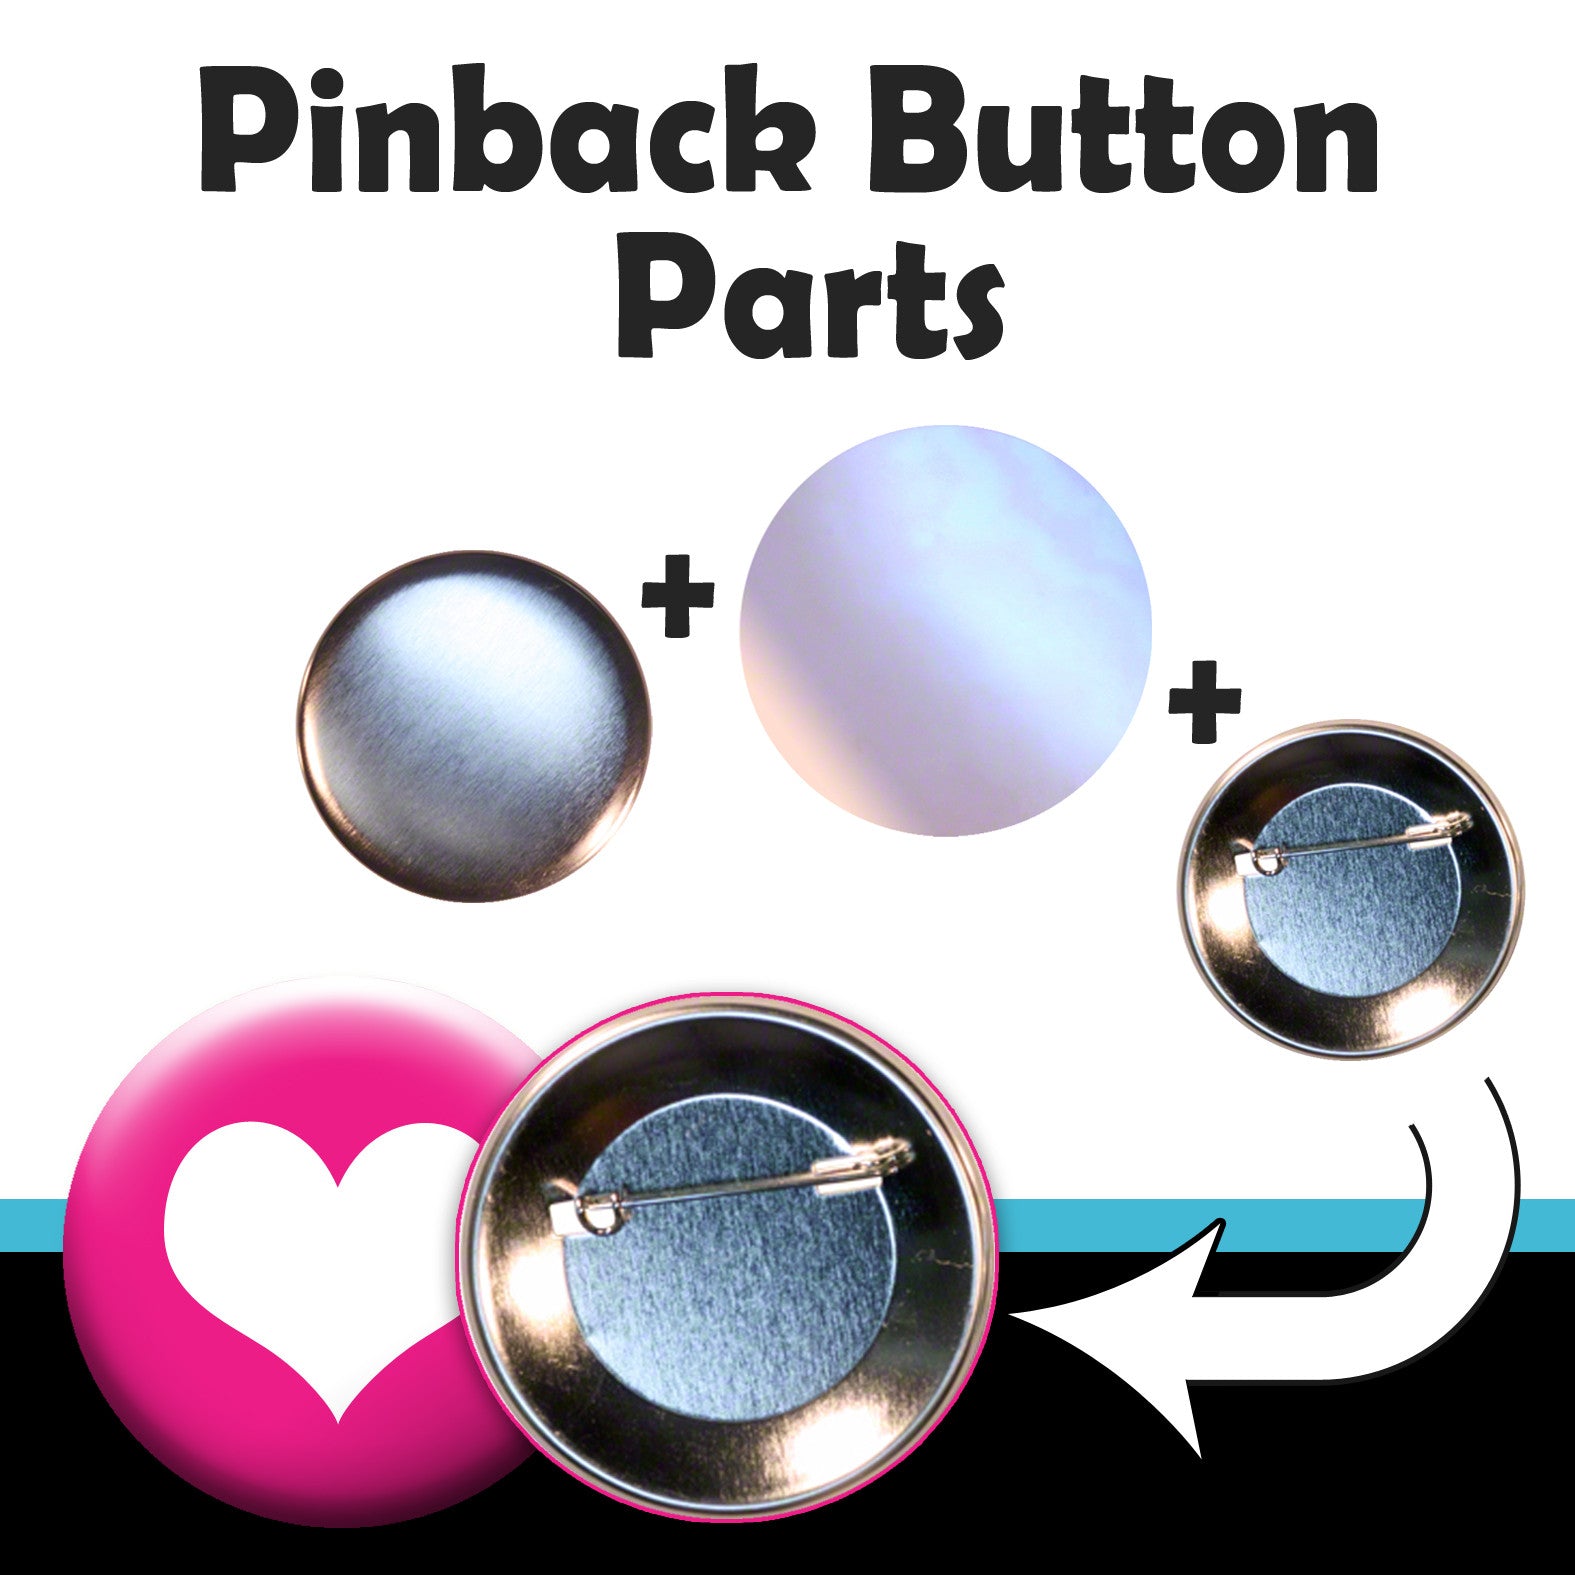 500 Sets Button Maker Supplies 25mm/1 Inch Pin Back Button Parts